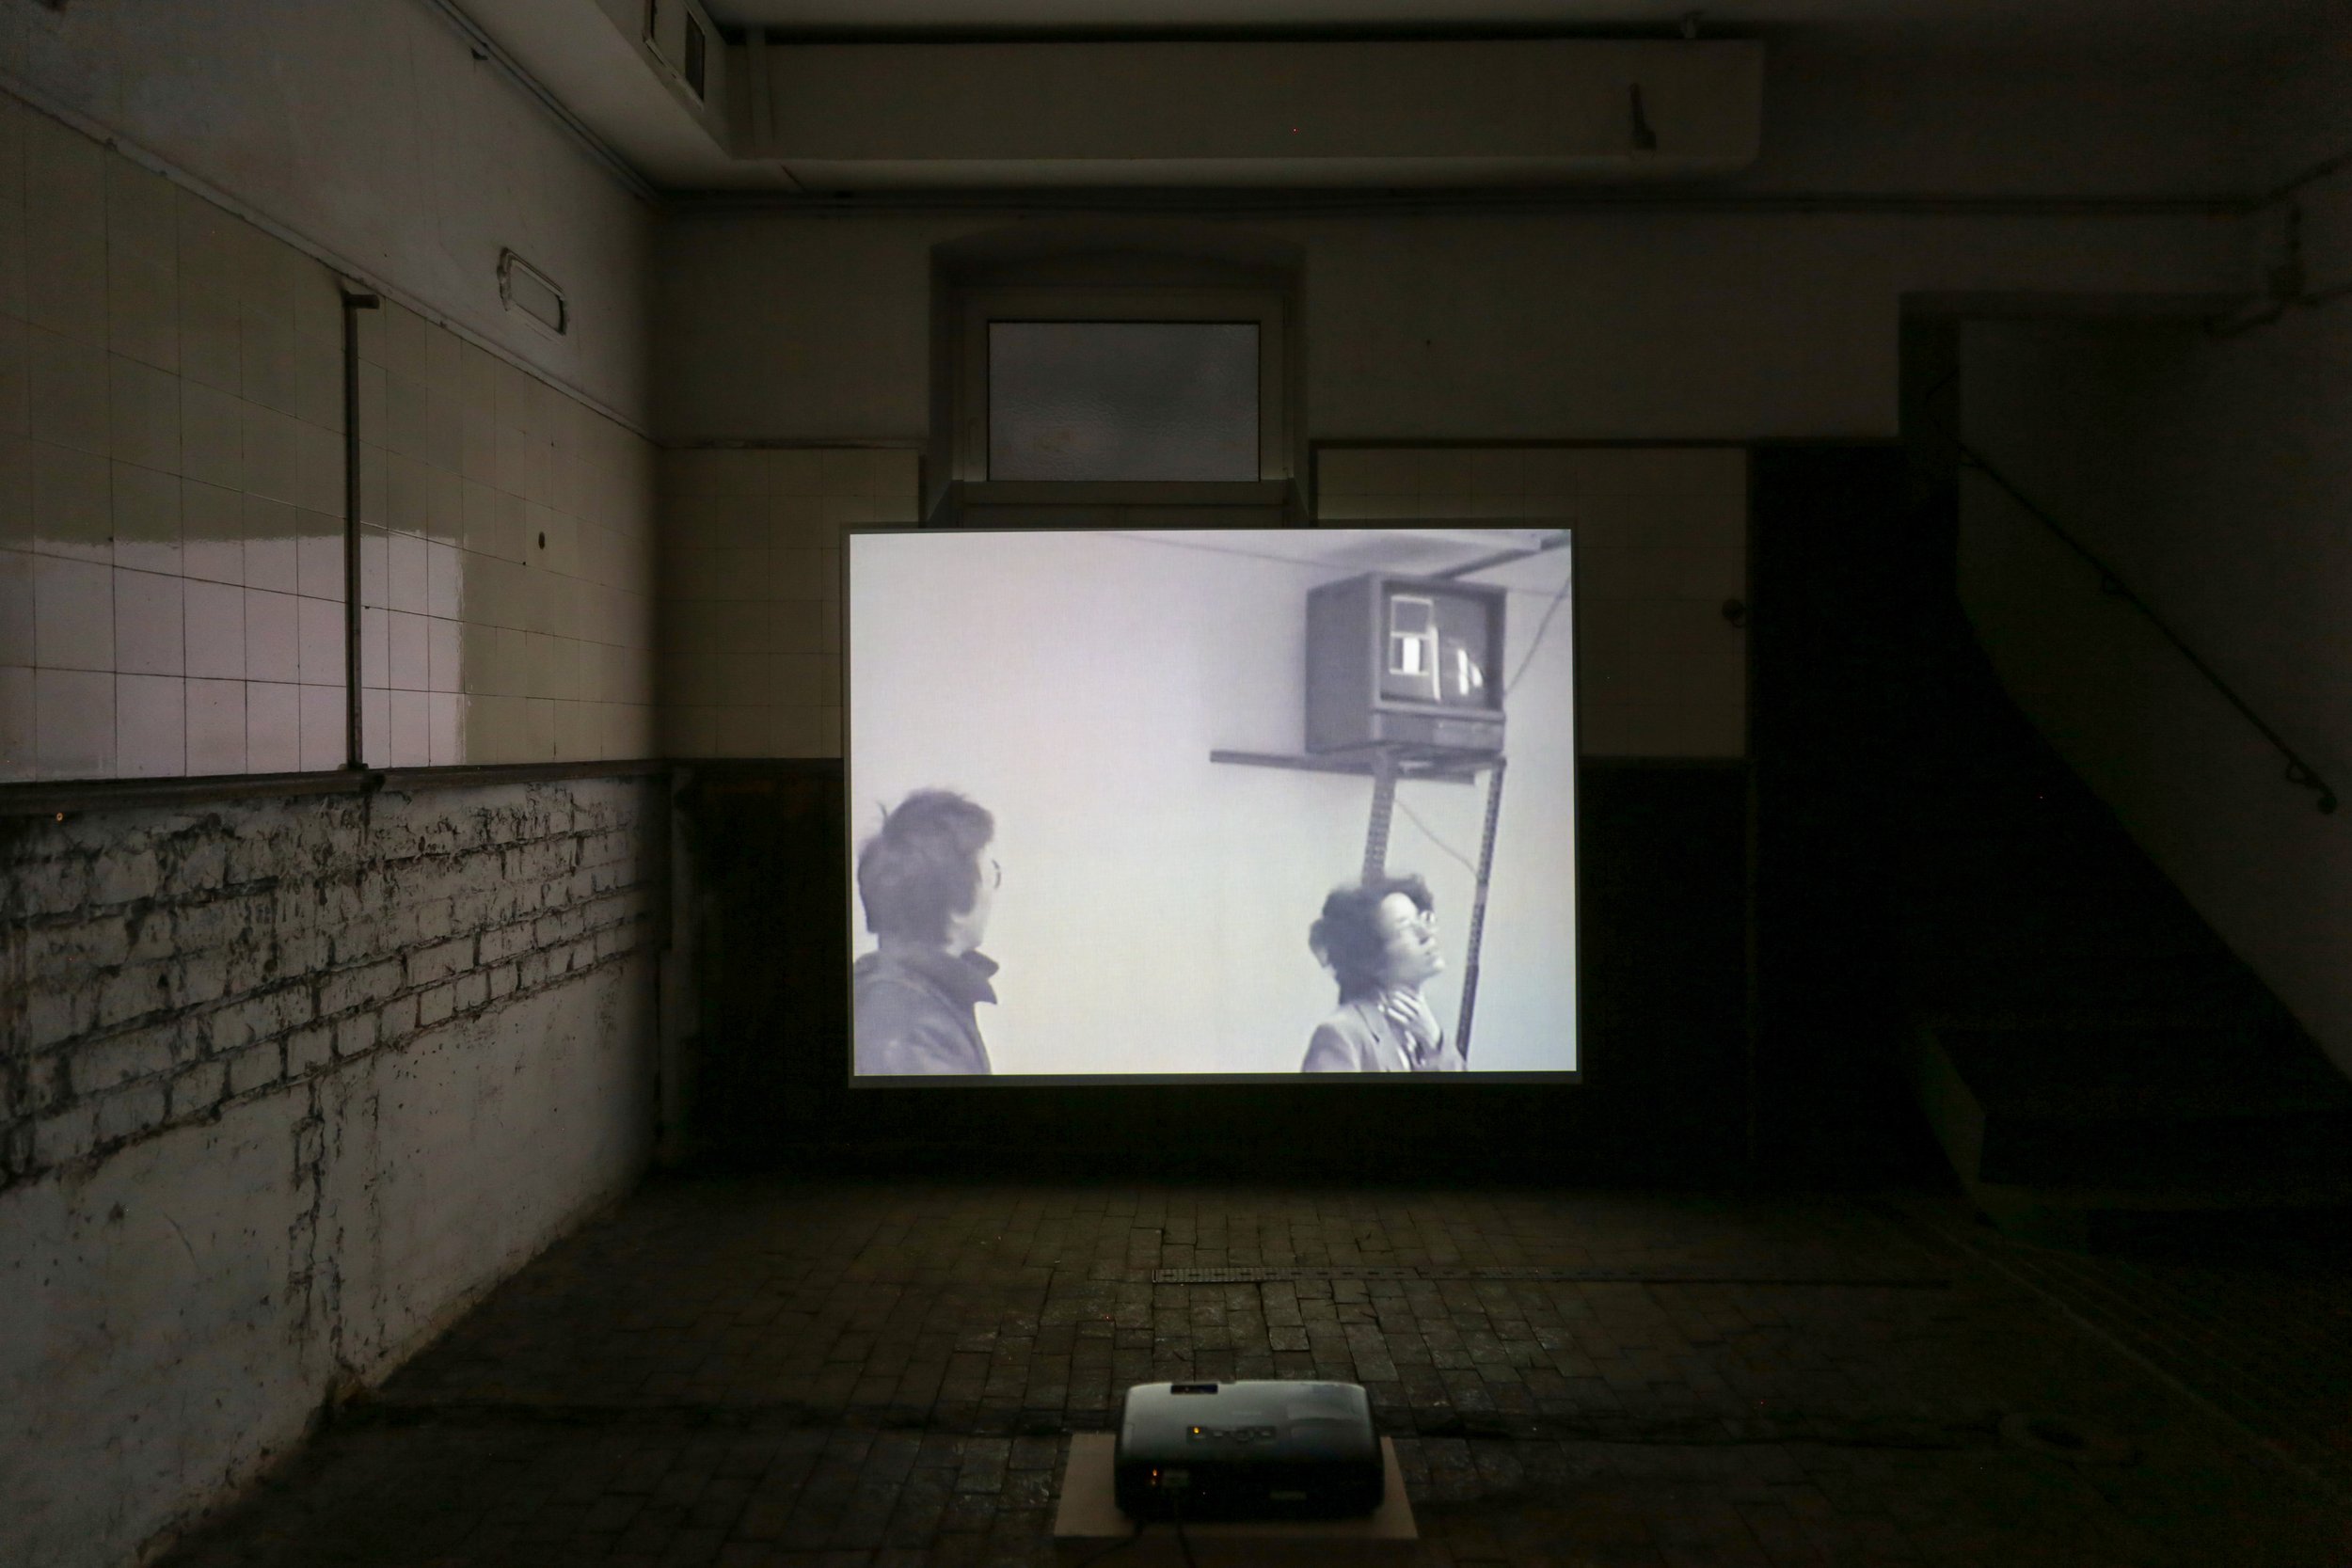   fig18 installation view Toine Horvers, Rolling, 1986 , 00:15:53., In collections: De Appel, LIMA  